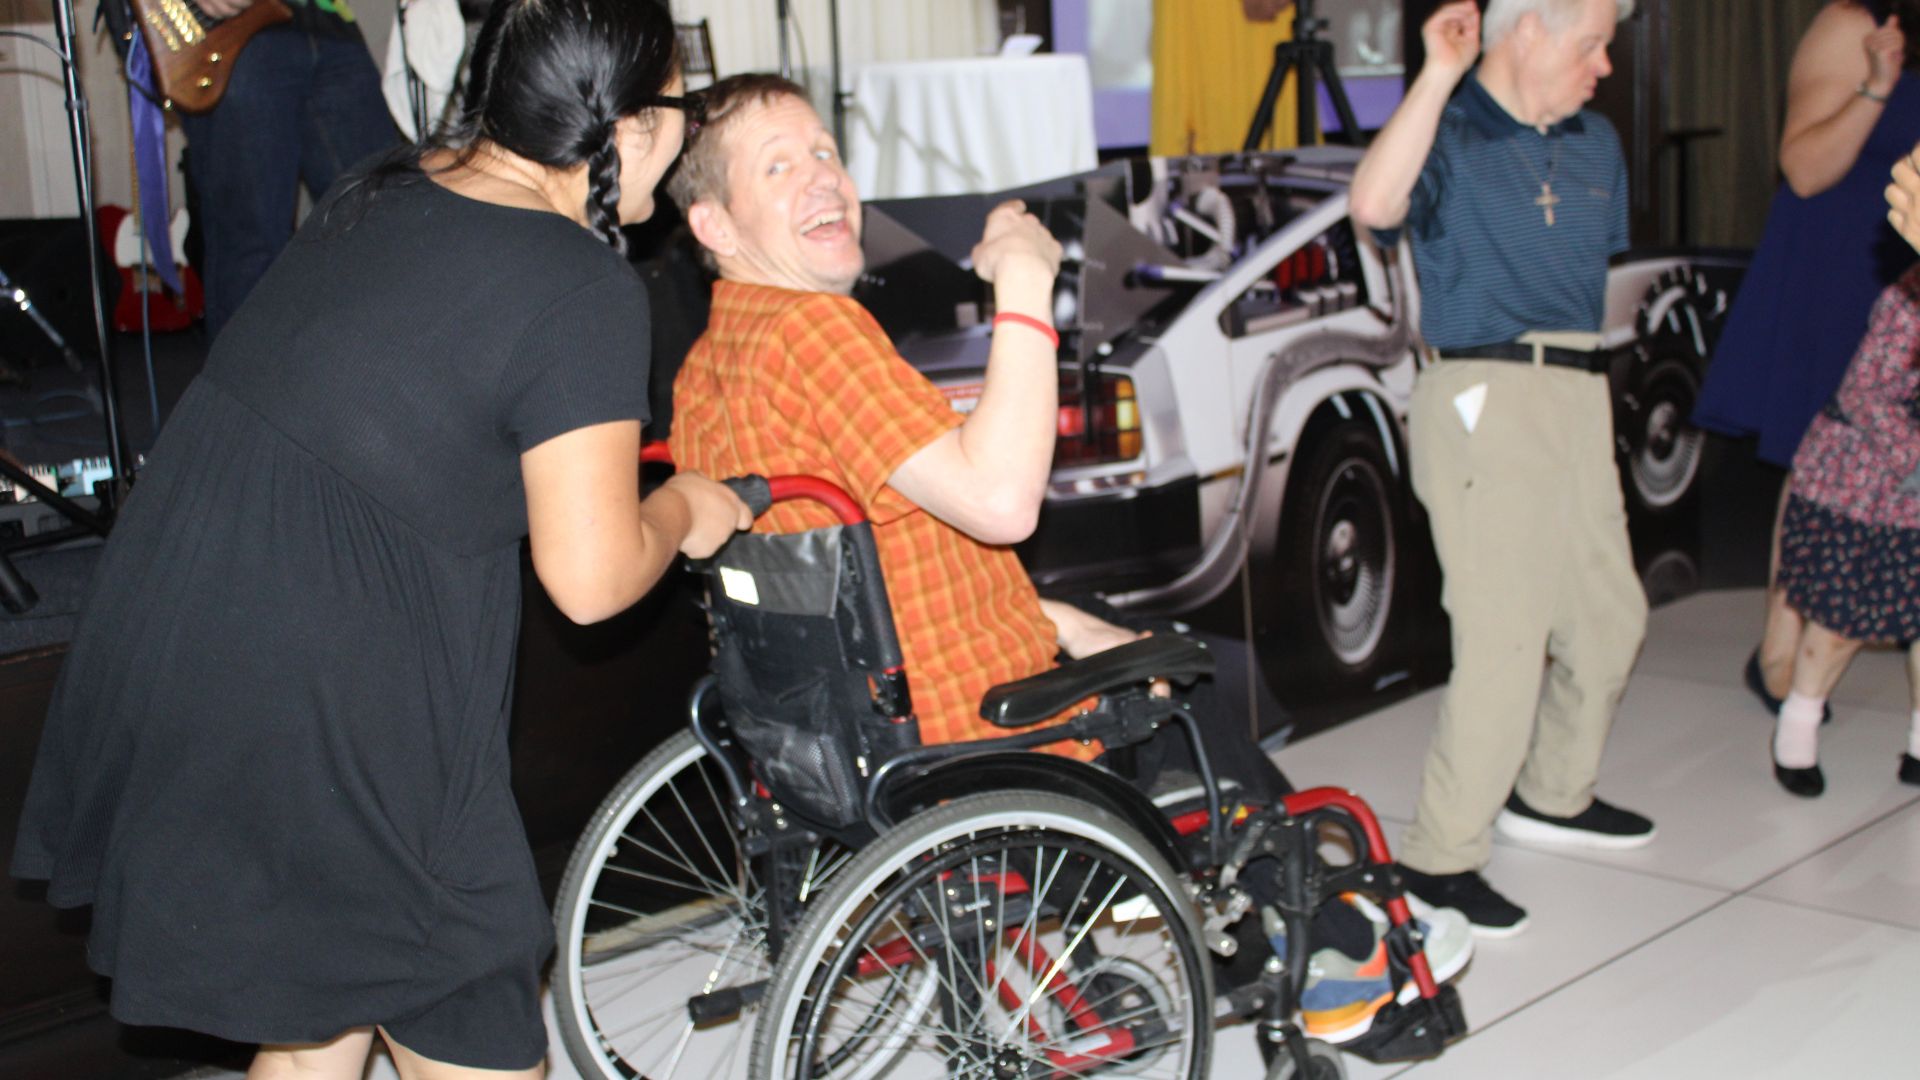 Associates dance in a contest. One in a wheelchair looks over his shoulder smiling at his dance partner.